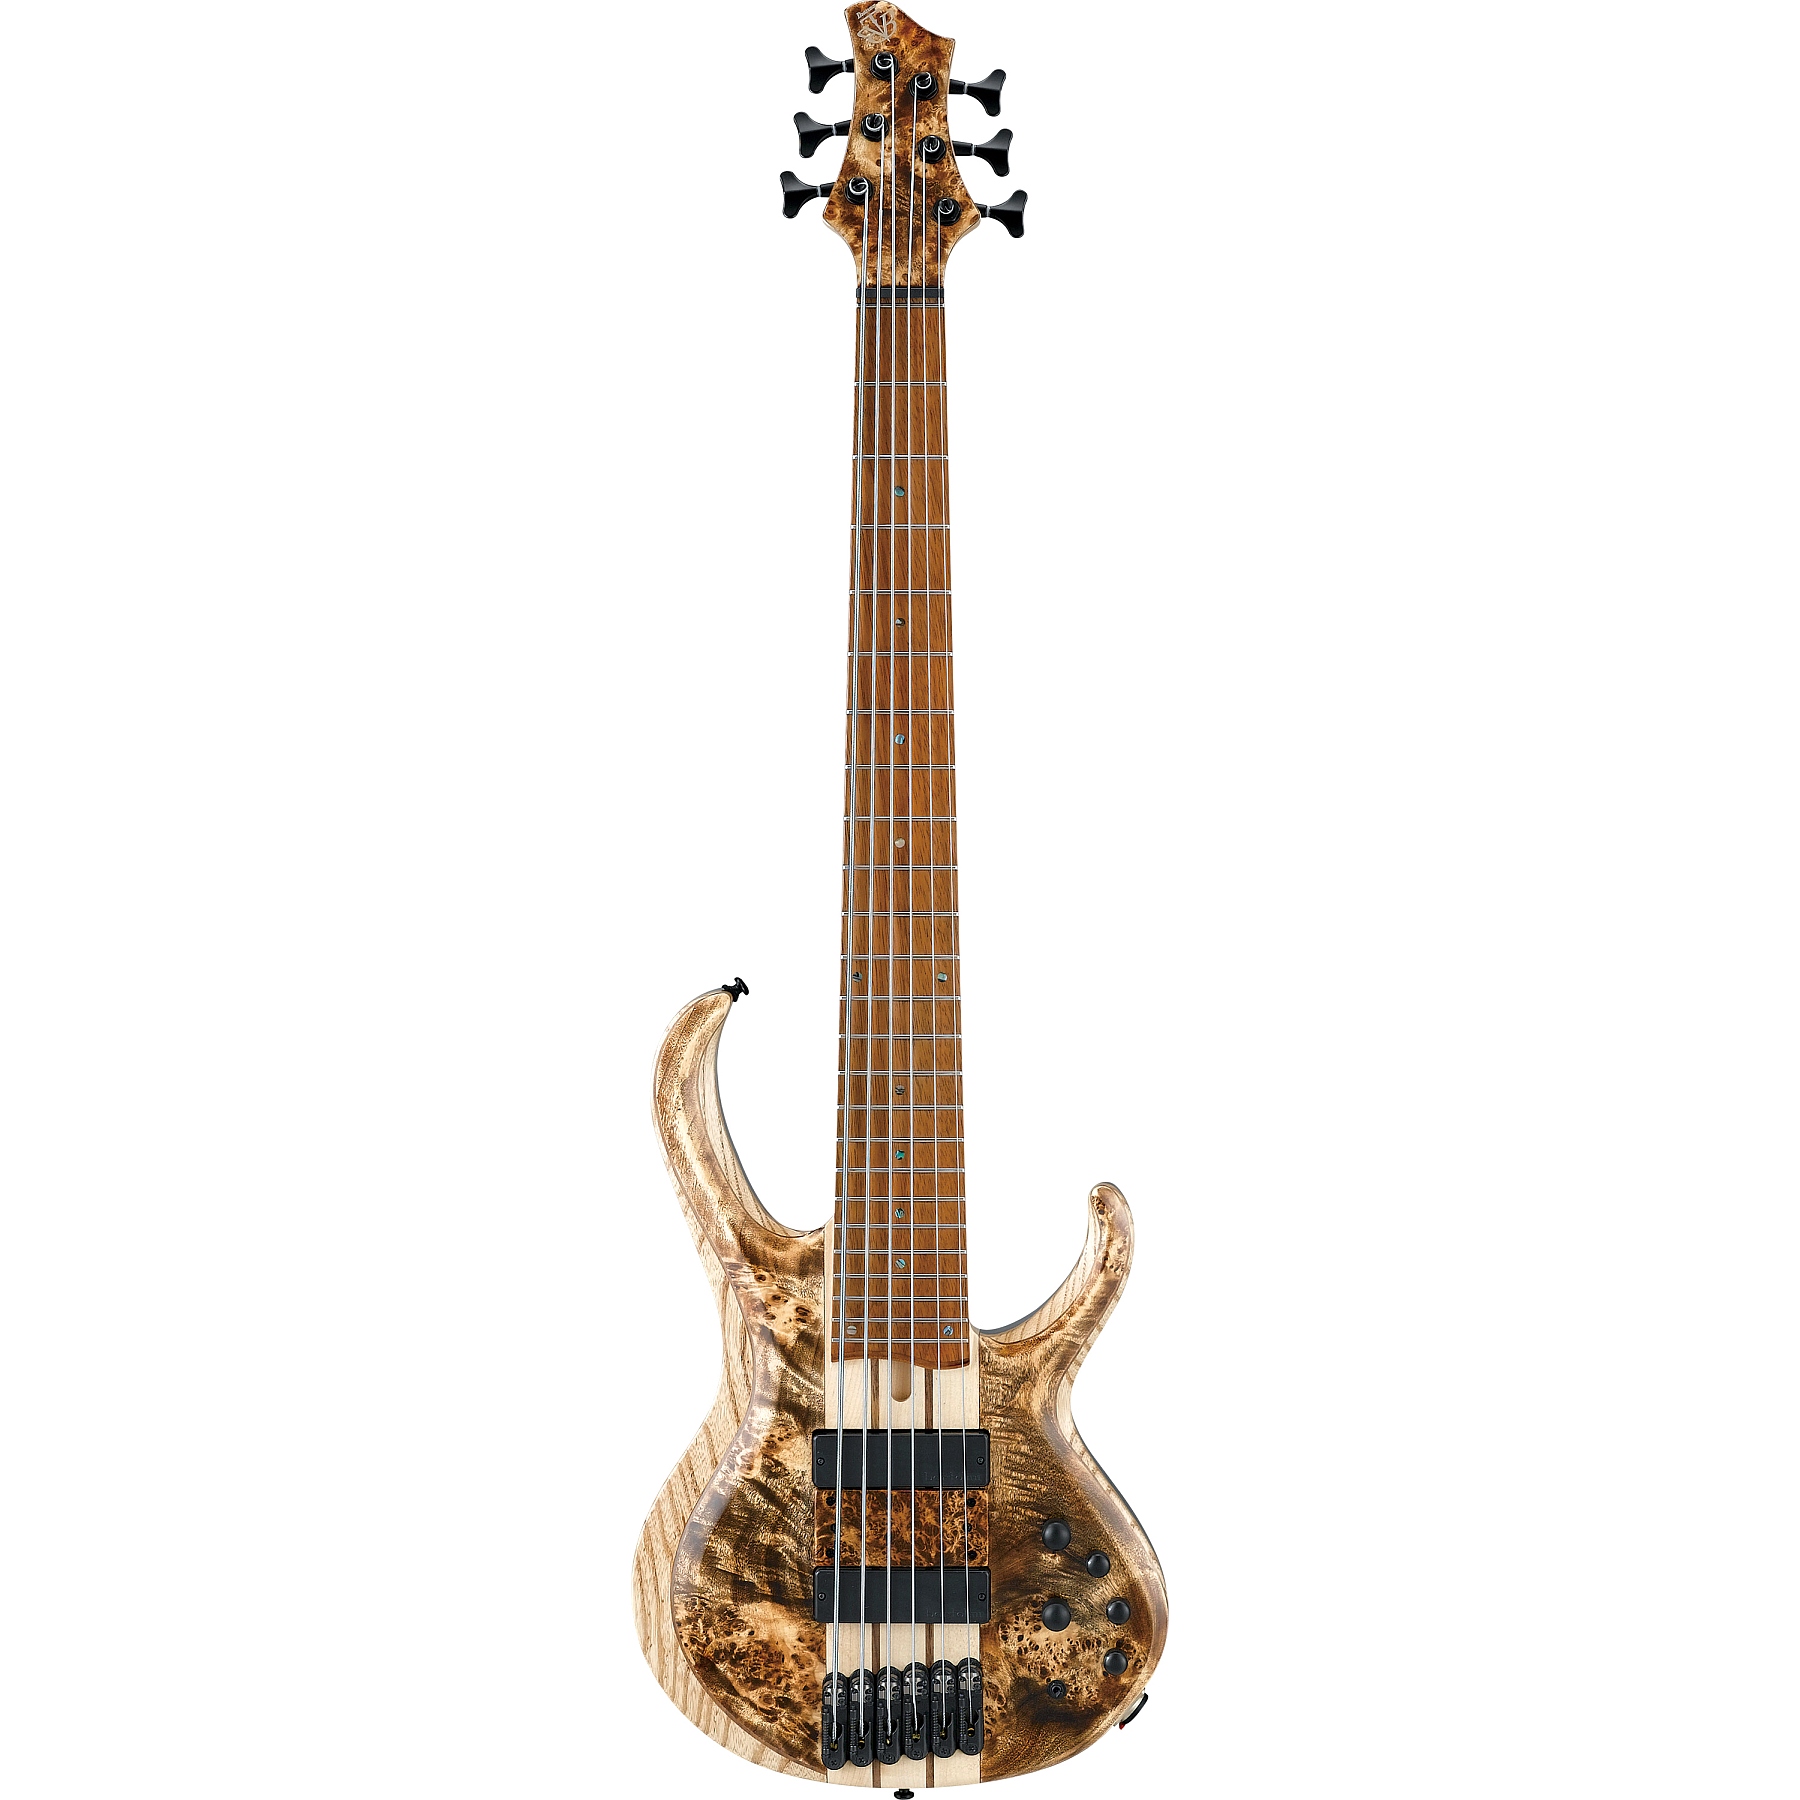 Ibanez BTB846V-ABL Bass Workshop Upgraded 33" "Volo" 6 String Antique Brown Stained Low Gloss